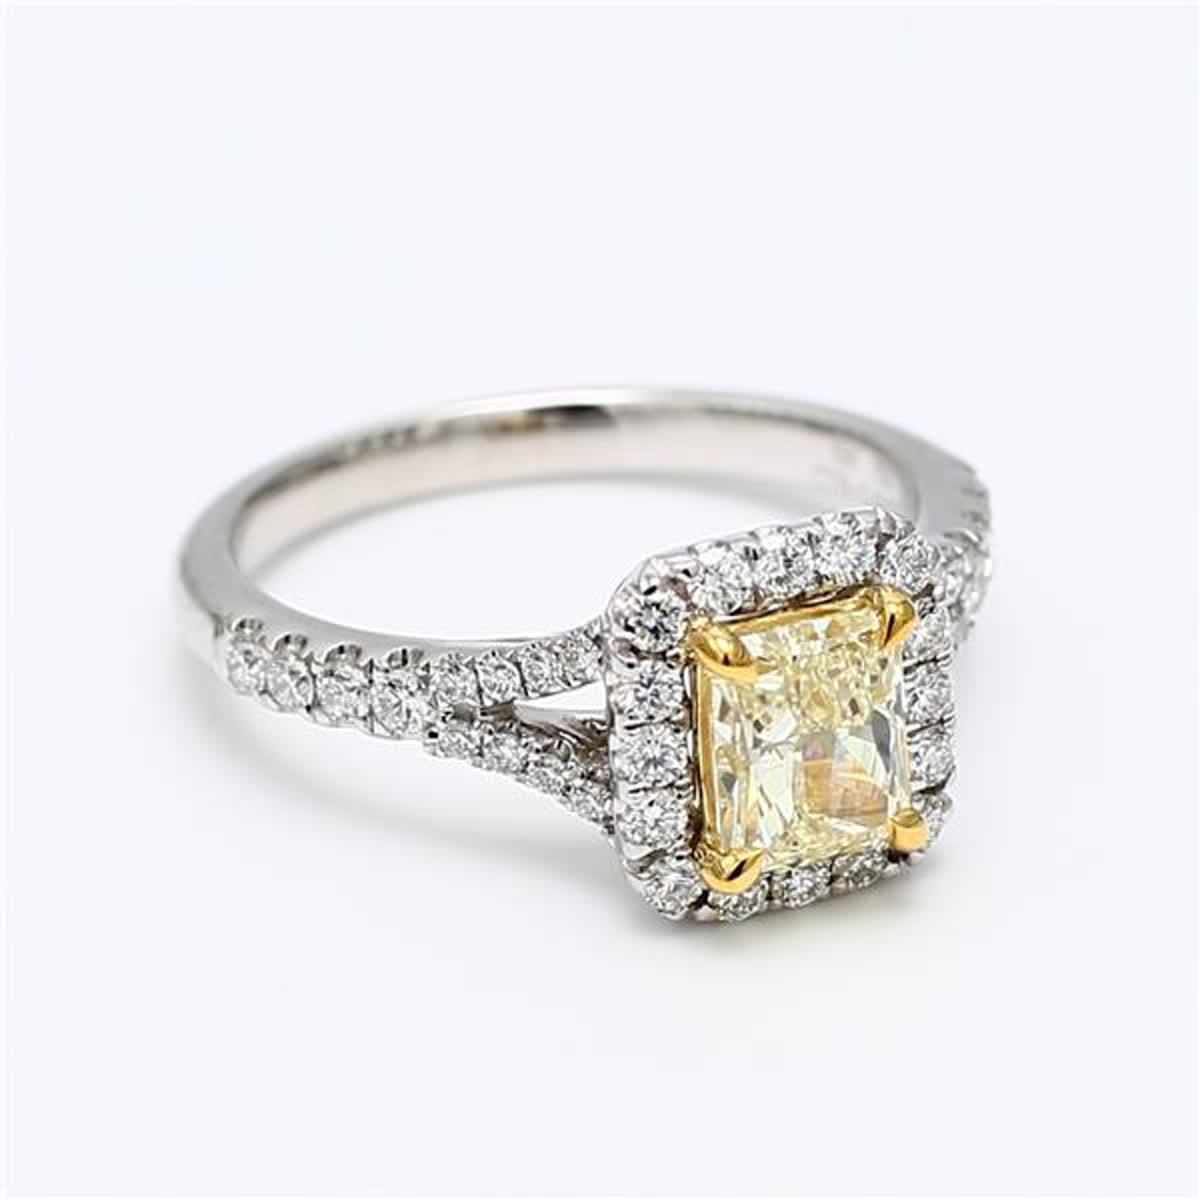 GIA Certified Natural Yellow Radiant and White Diamond 1.41 Carat TW Plat Ring